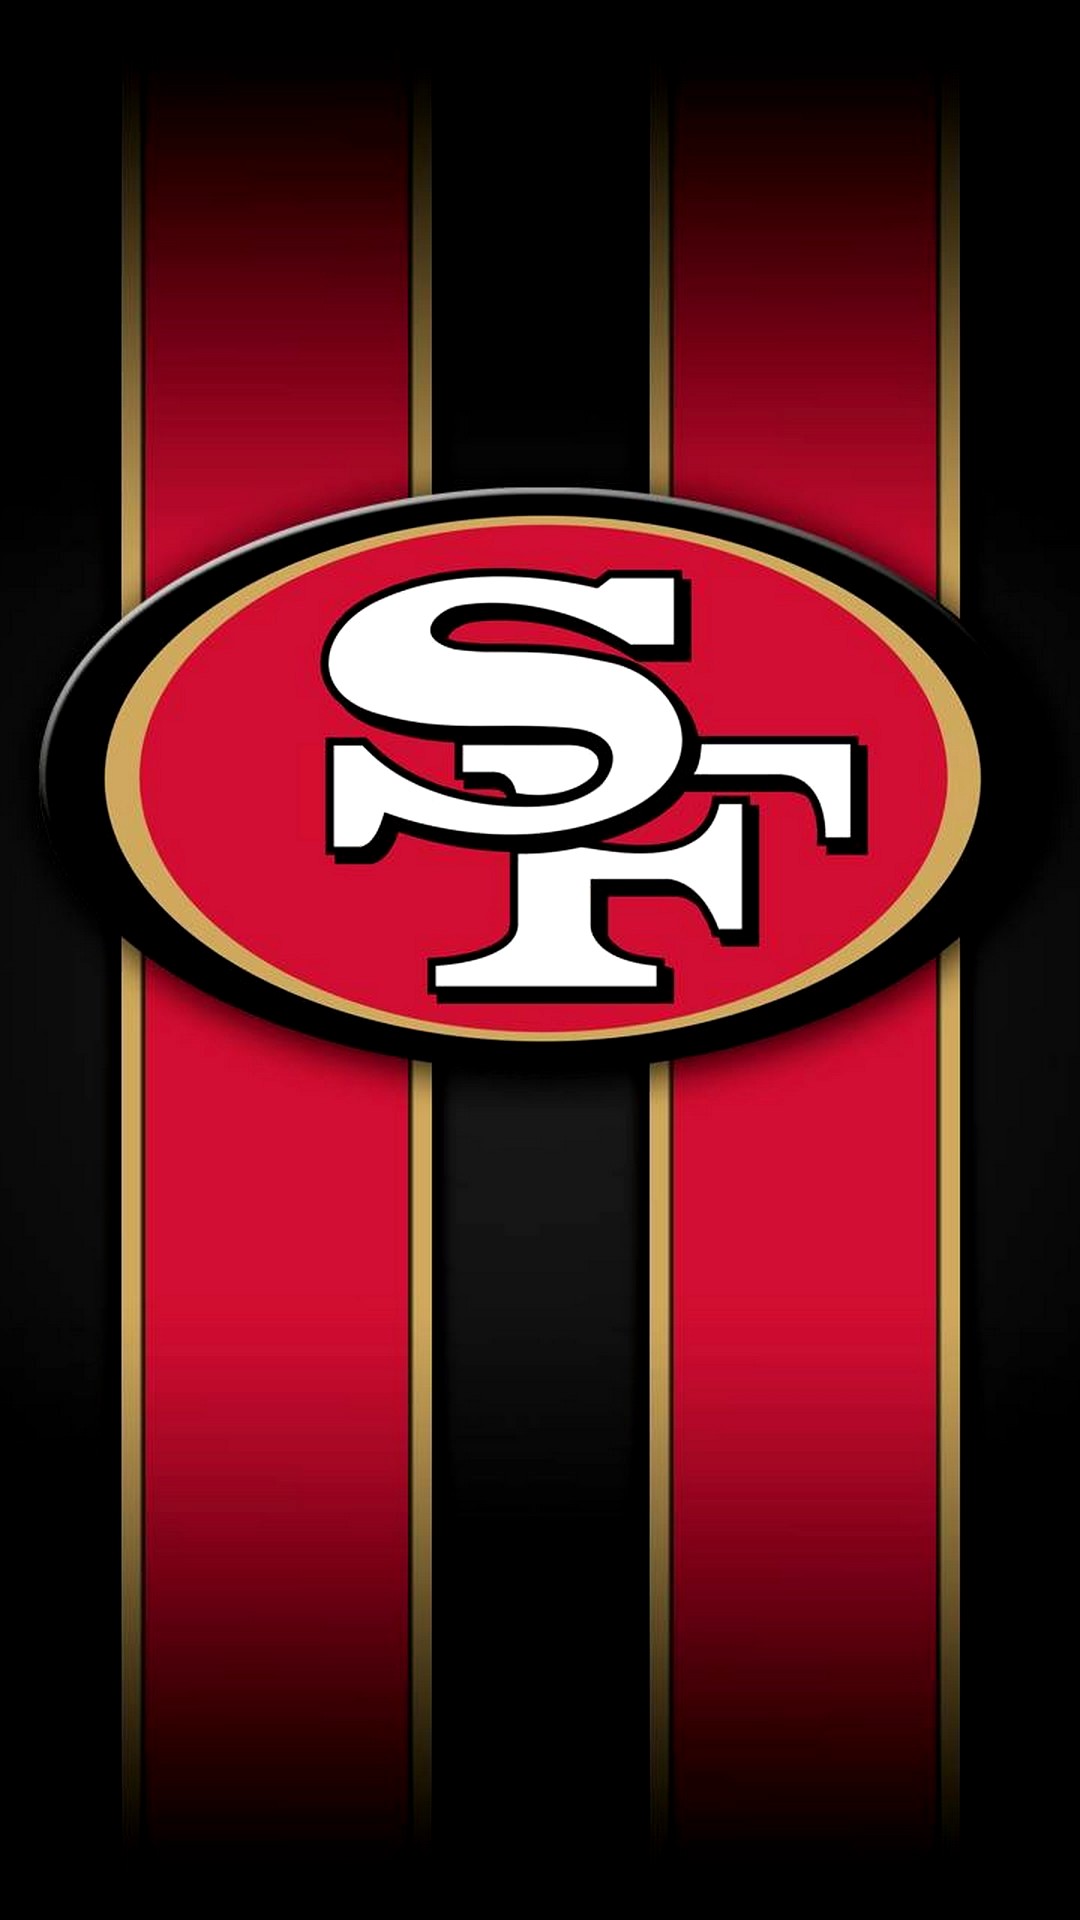 San Francisco 49ers NFL iPhone Wallpaper New With high-resolution 1080X1920 pixel. Donwload and set as wallpaper for your iPhone X, iPhone XS home screen backgrounds, XS Max, XR, iPhone8 lock screen wallpaper, iPhone 7, 6, SE, and other mobile devices